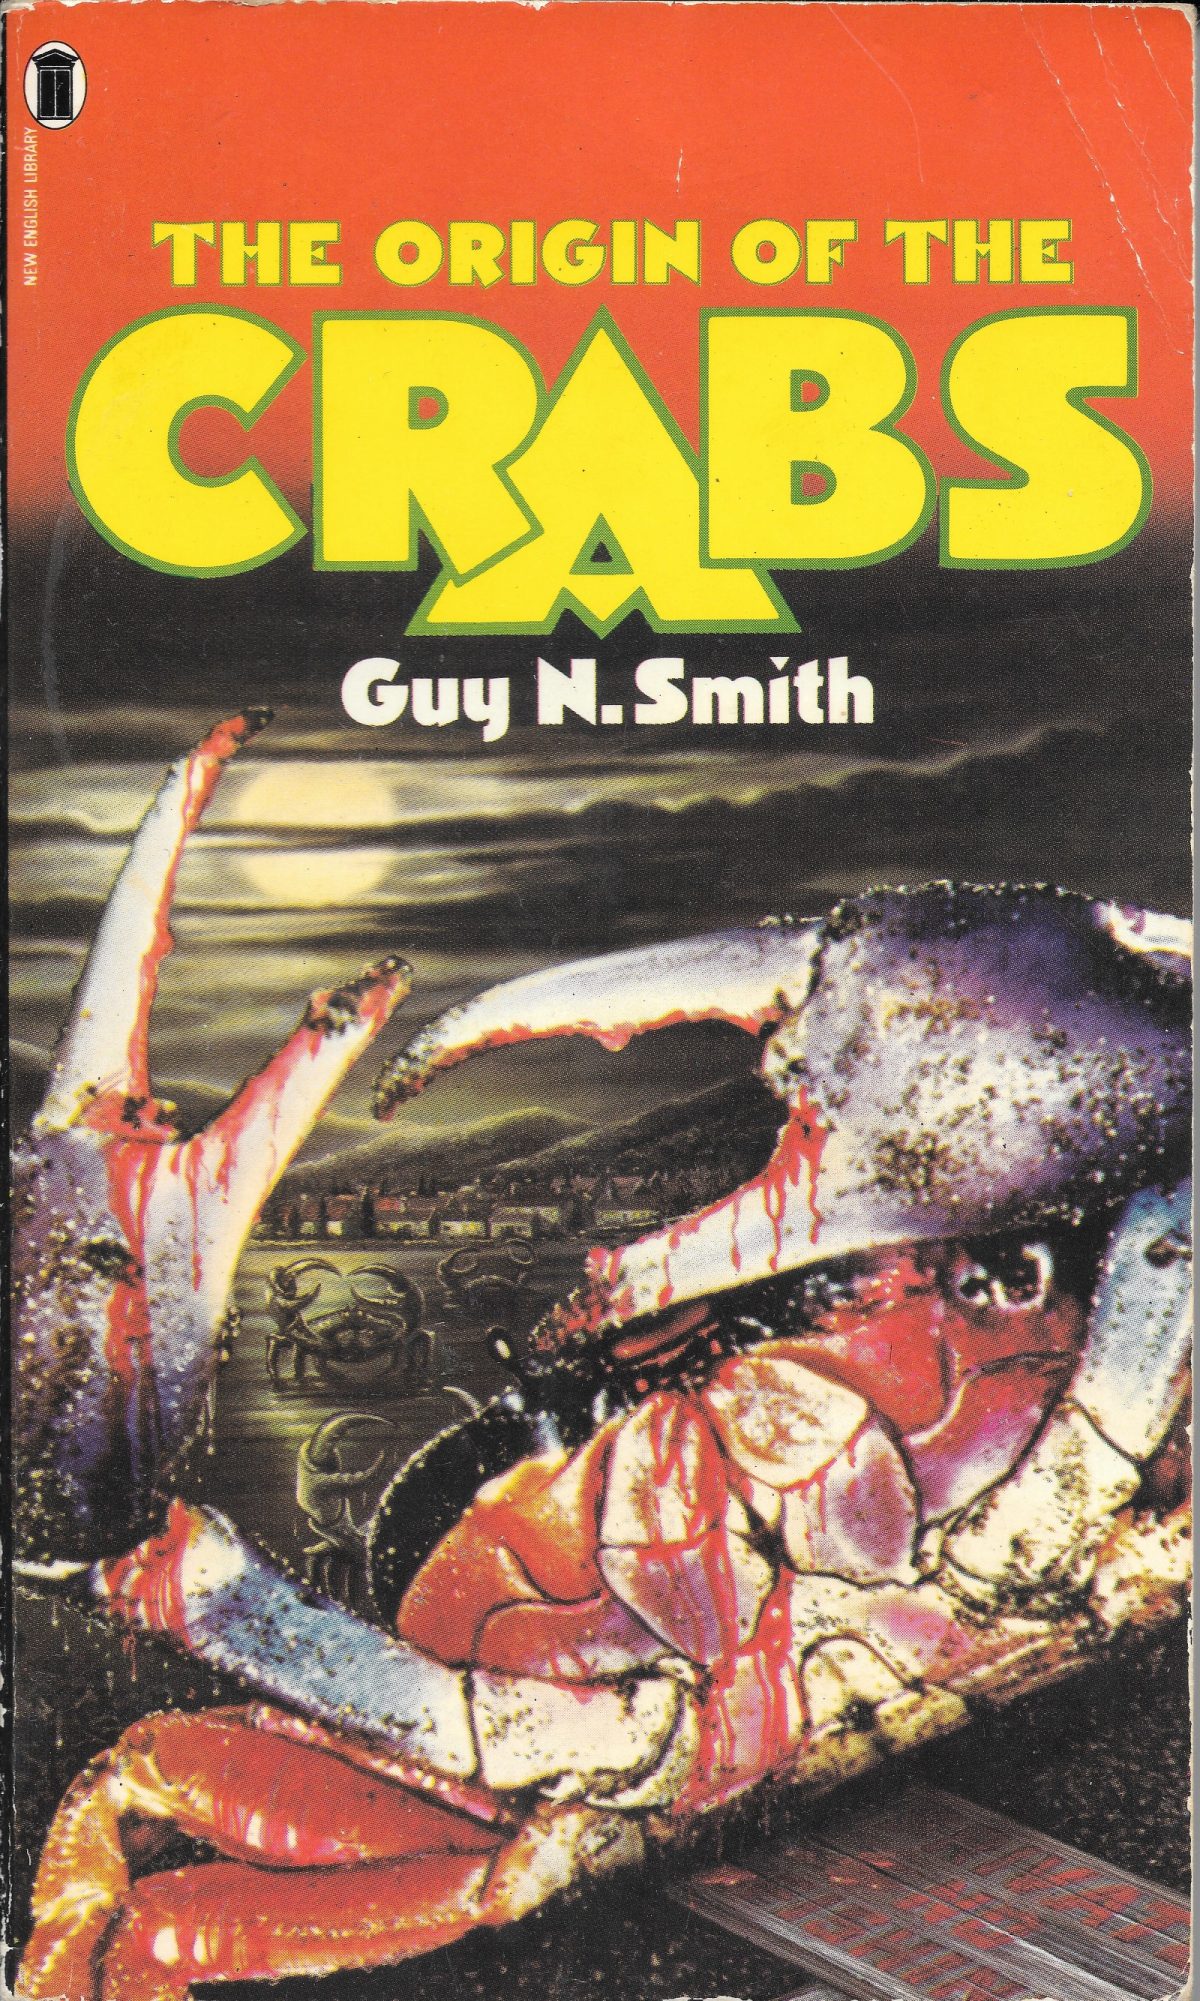 Guy N Smith, horror fictions, horror, books, Origin of the Crabs